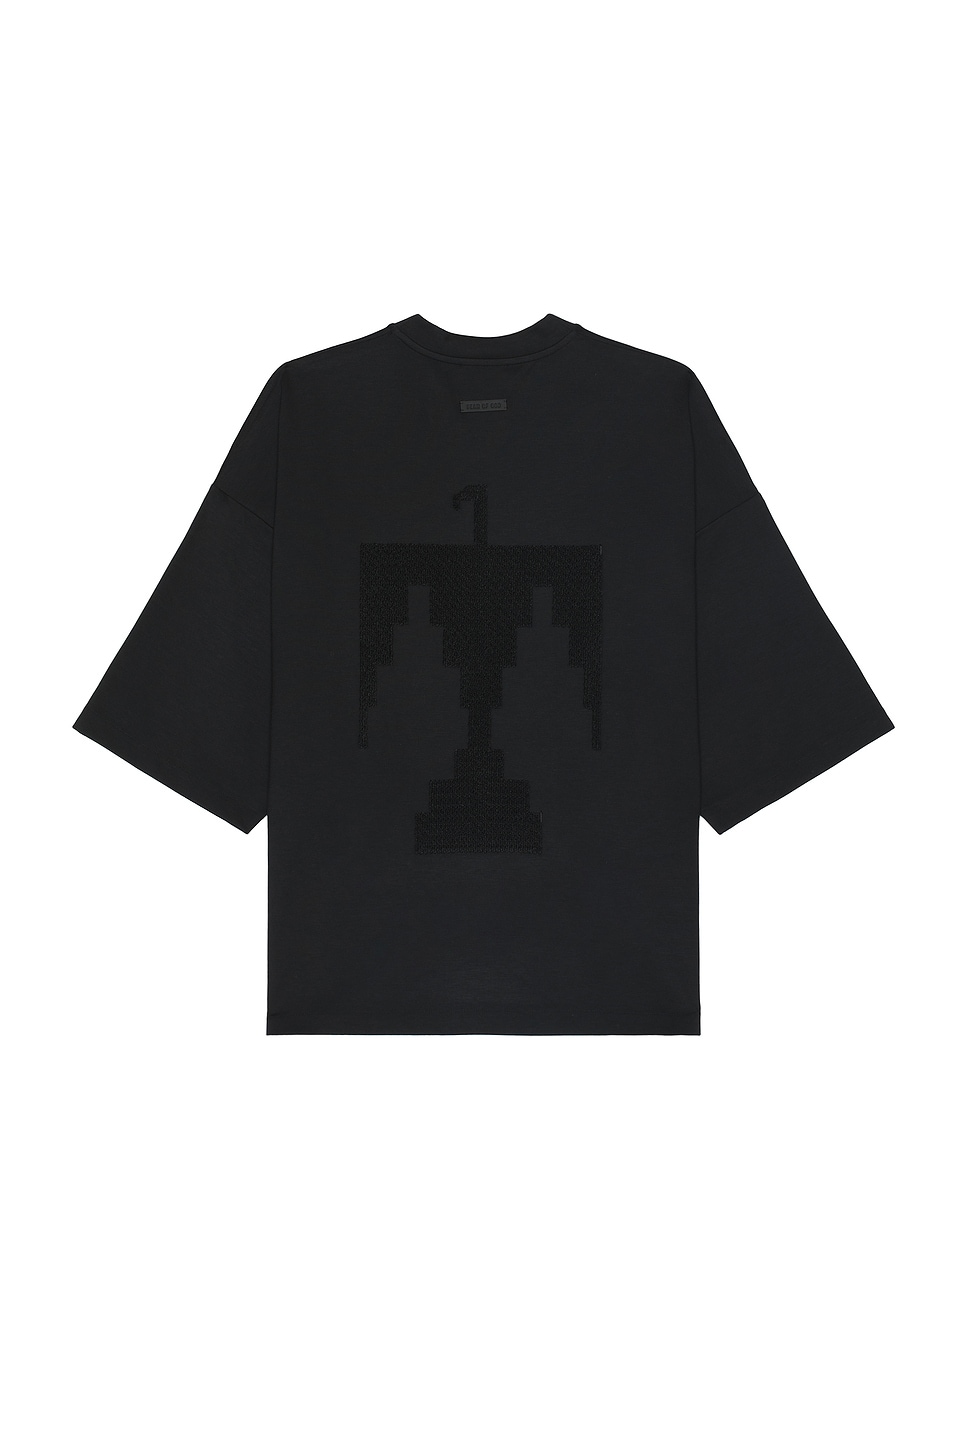 Image 1 of Fear of God Viscose Embroidered Thunderbird Milano Tee in Black